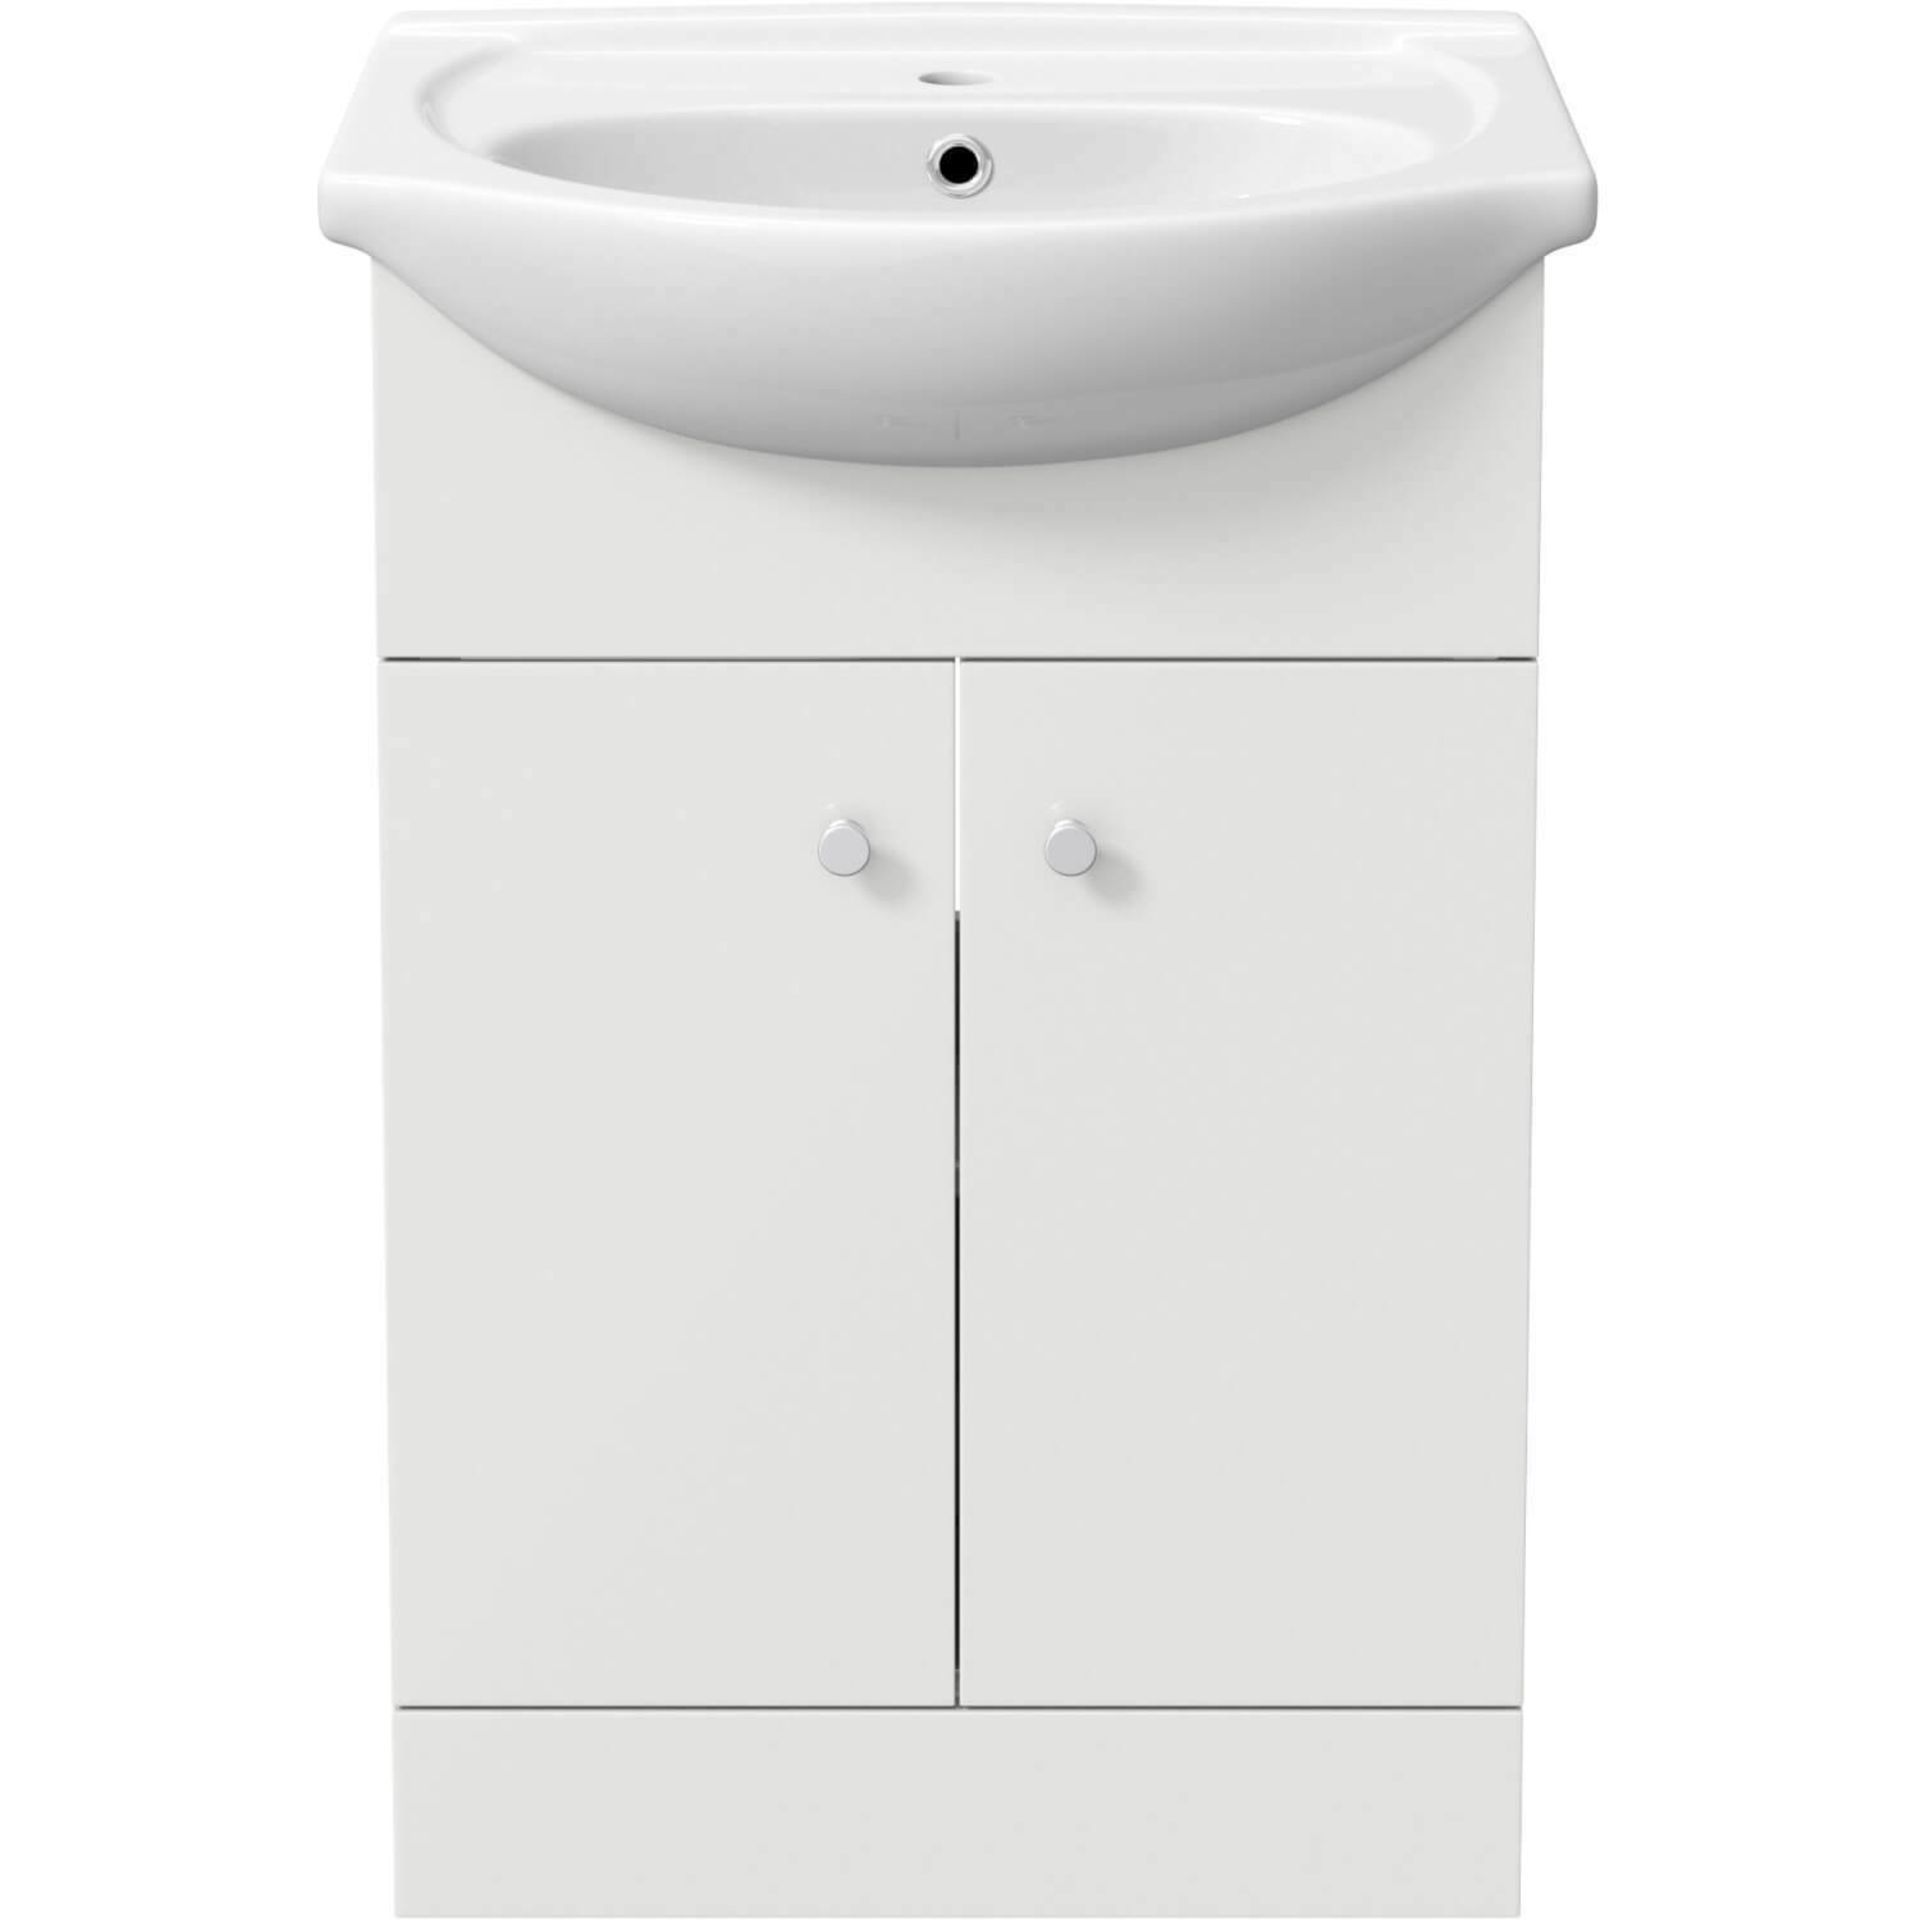 NEW & BOXED 650mm Quartz Basin Sink Vanity Unit Floor Standing White.RRP £399.99.Comes complet... - Image 3 of 3